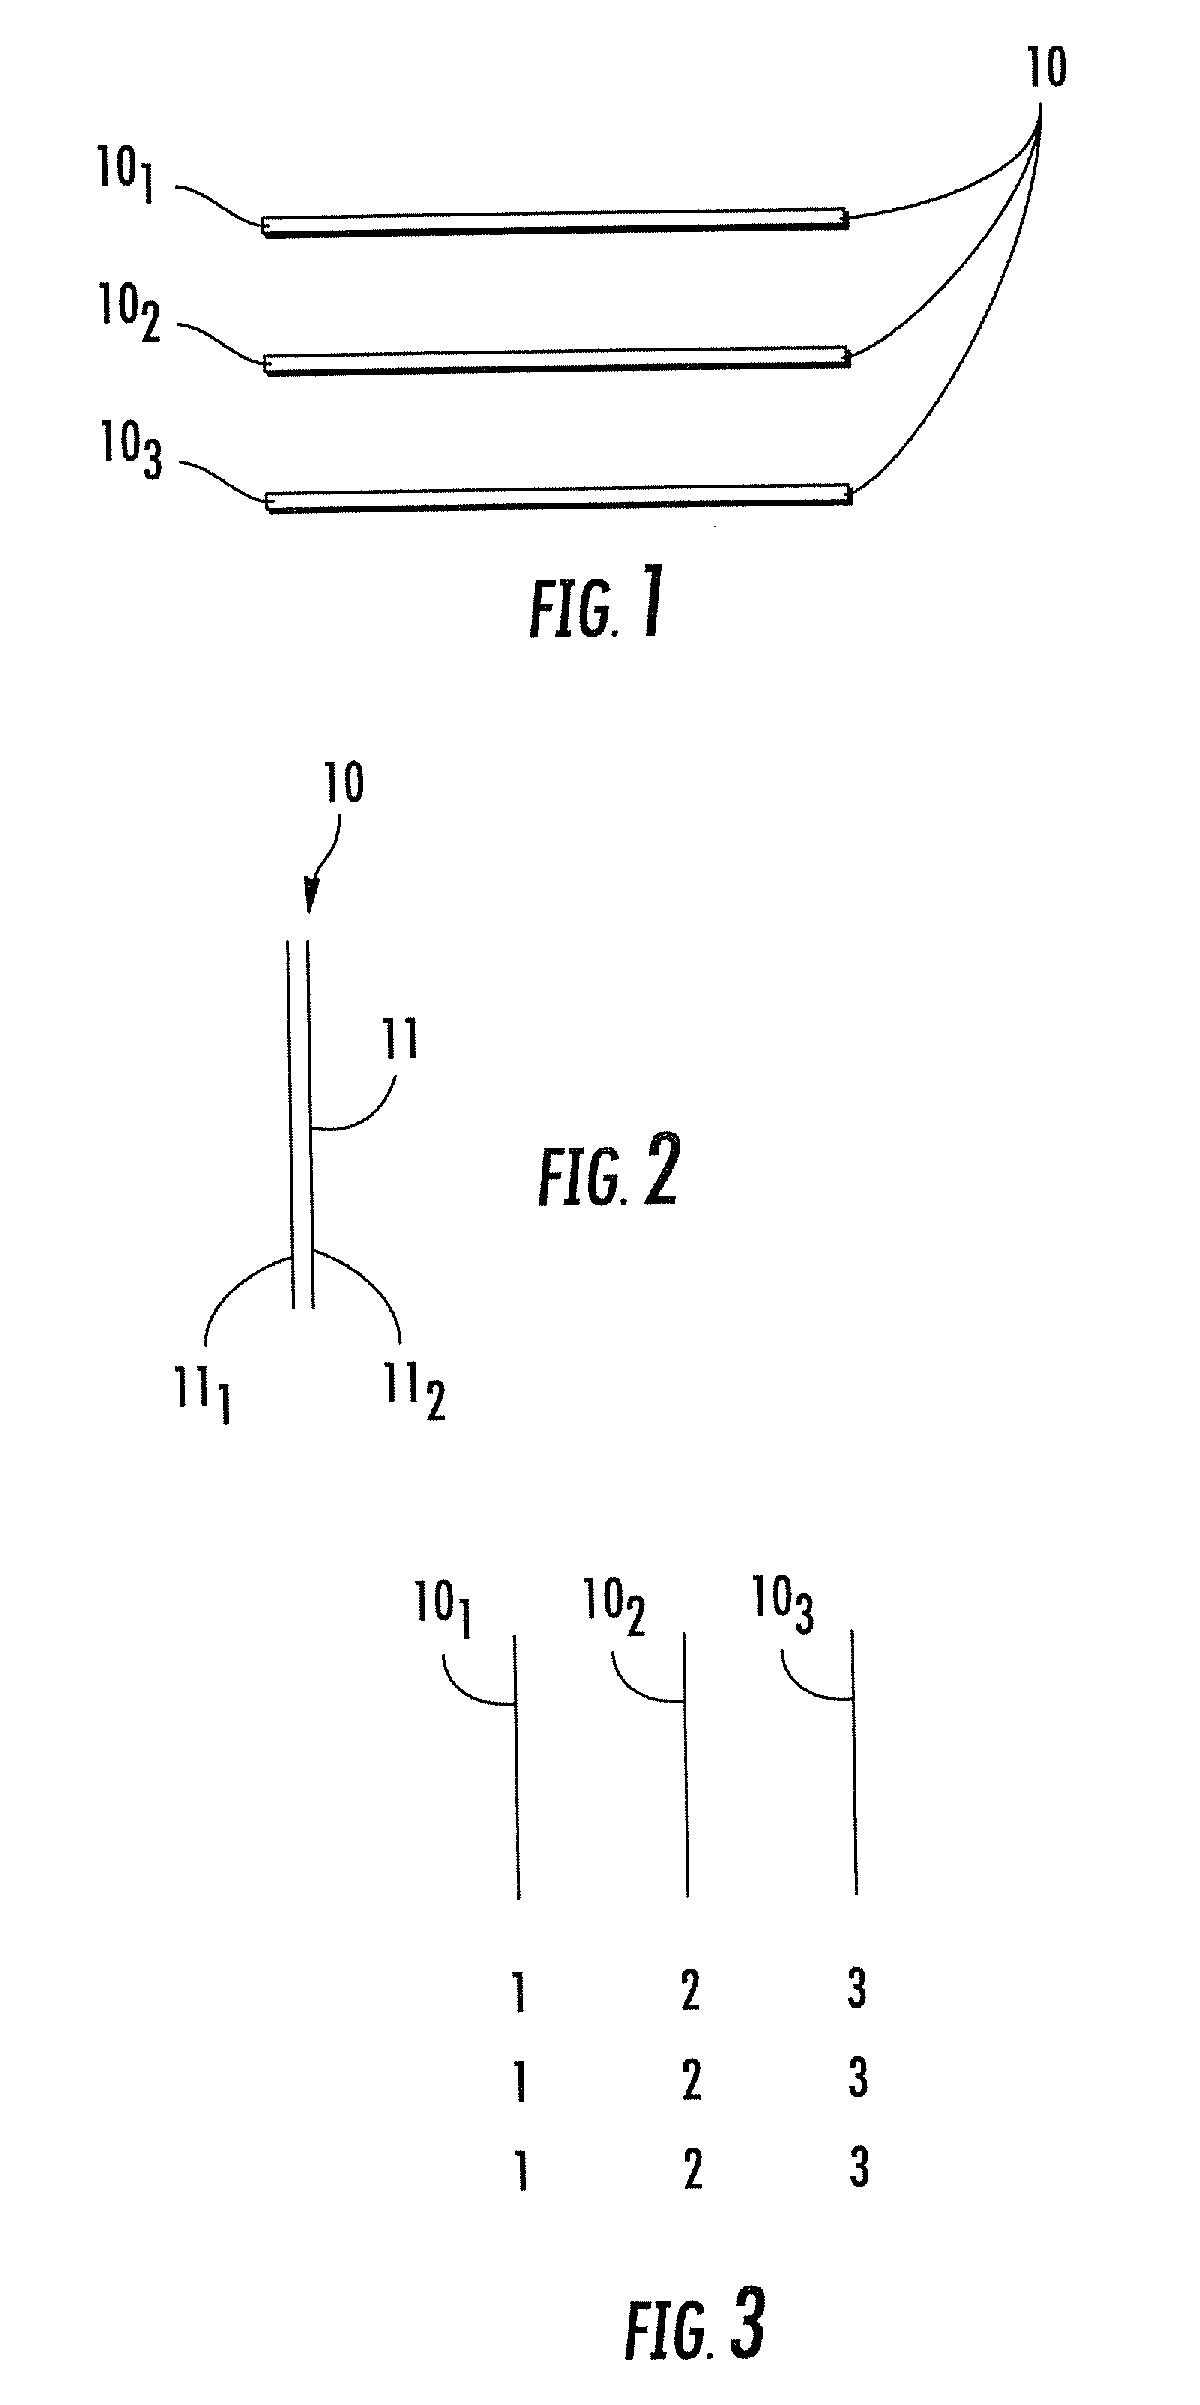 Woven and/or braided fiber implants and methods of making same